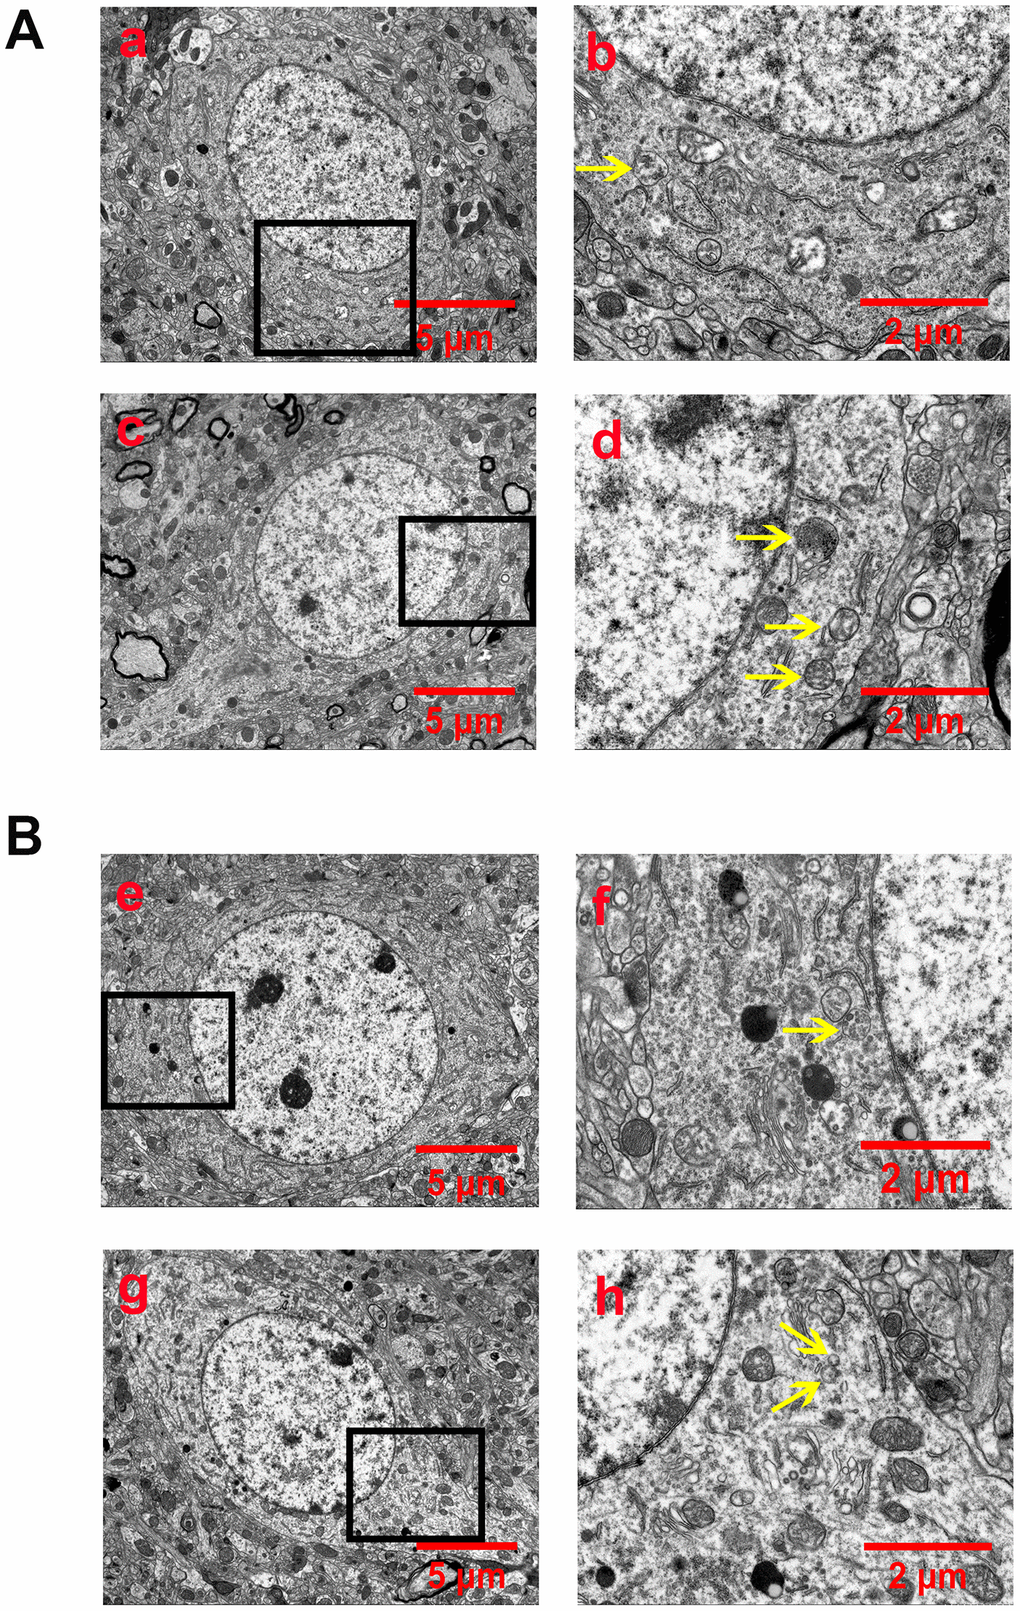 EA pretreatment inhibited the formation of autophagosomes and autophagolysosomes (yellow arrow) in cortical neurons of rats with CIR injury. (A) Autophagosomes and autophagolysosomes in neurons of the peri-ischemic cortex in the sham group (a and b) and the I/R group (c and d). (B) Autophagosomes and autophagolysosomes in neurons of the peri-ischemic cortex in the I/R + EA group (e and f) and the I/R + EA + EX527 group (g and h). The images of b, d, f, and h indicated the enlarged area of the squares in a, c, e, and g, respectively. Scale bar: a, c, e, g, 5 μm; b, d, f, h, 2 μm.